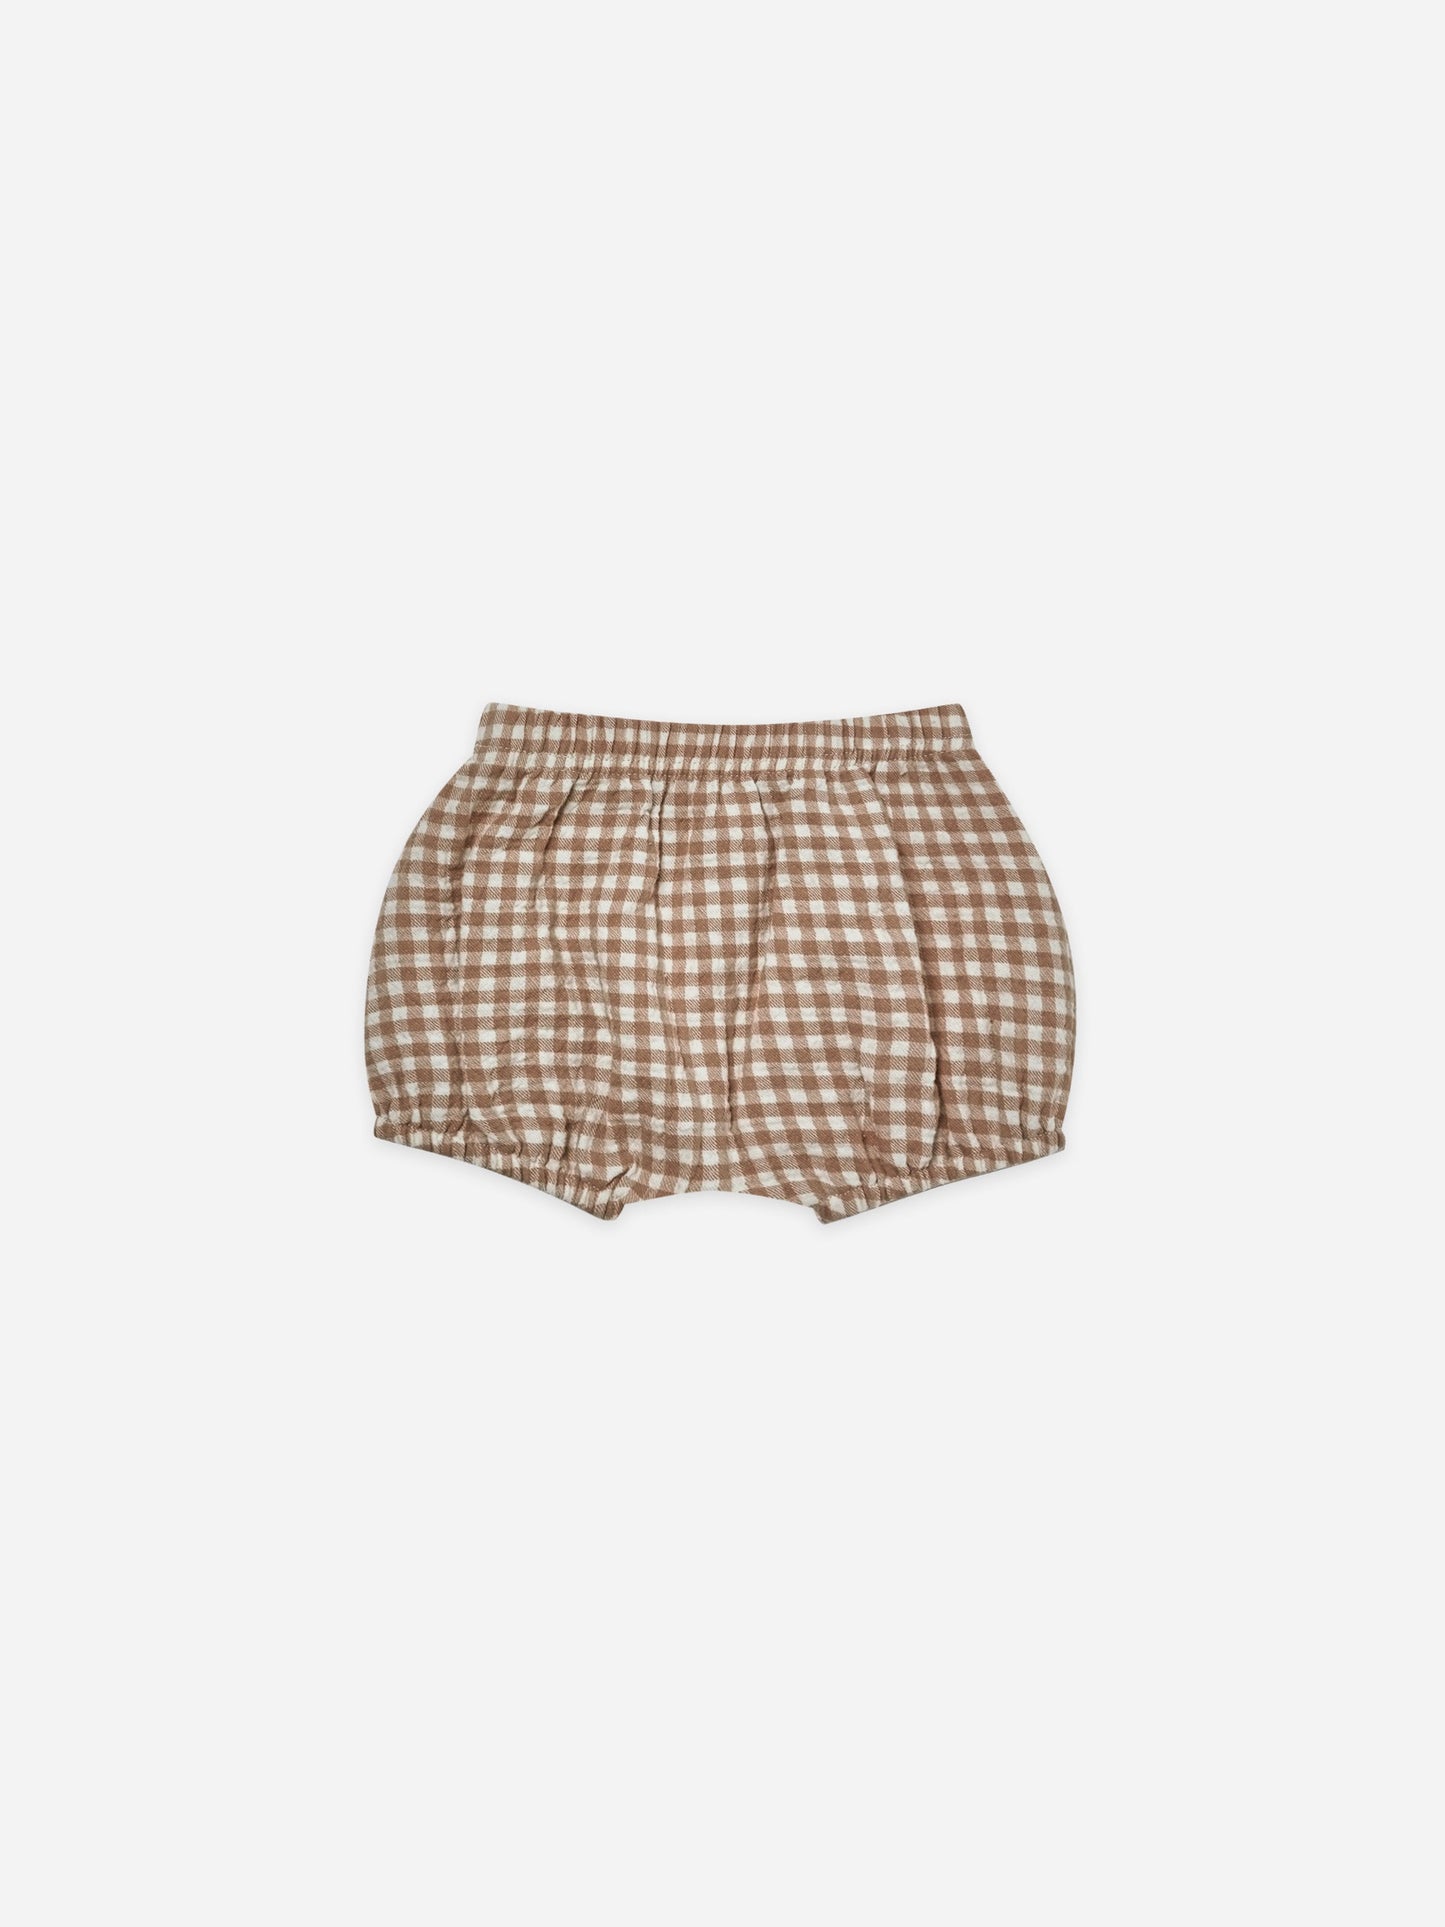 Woven Bloomer - Cocoa Gingham